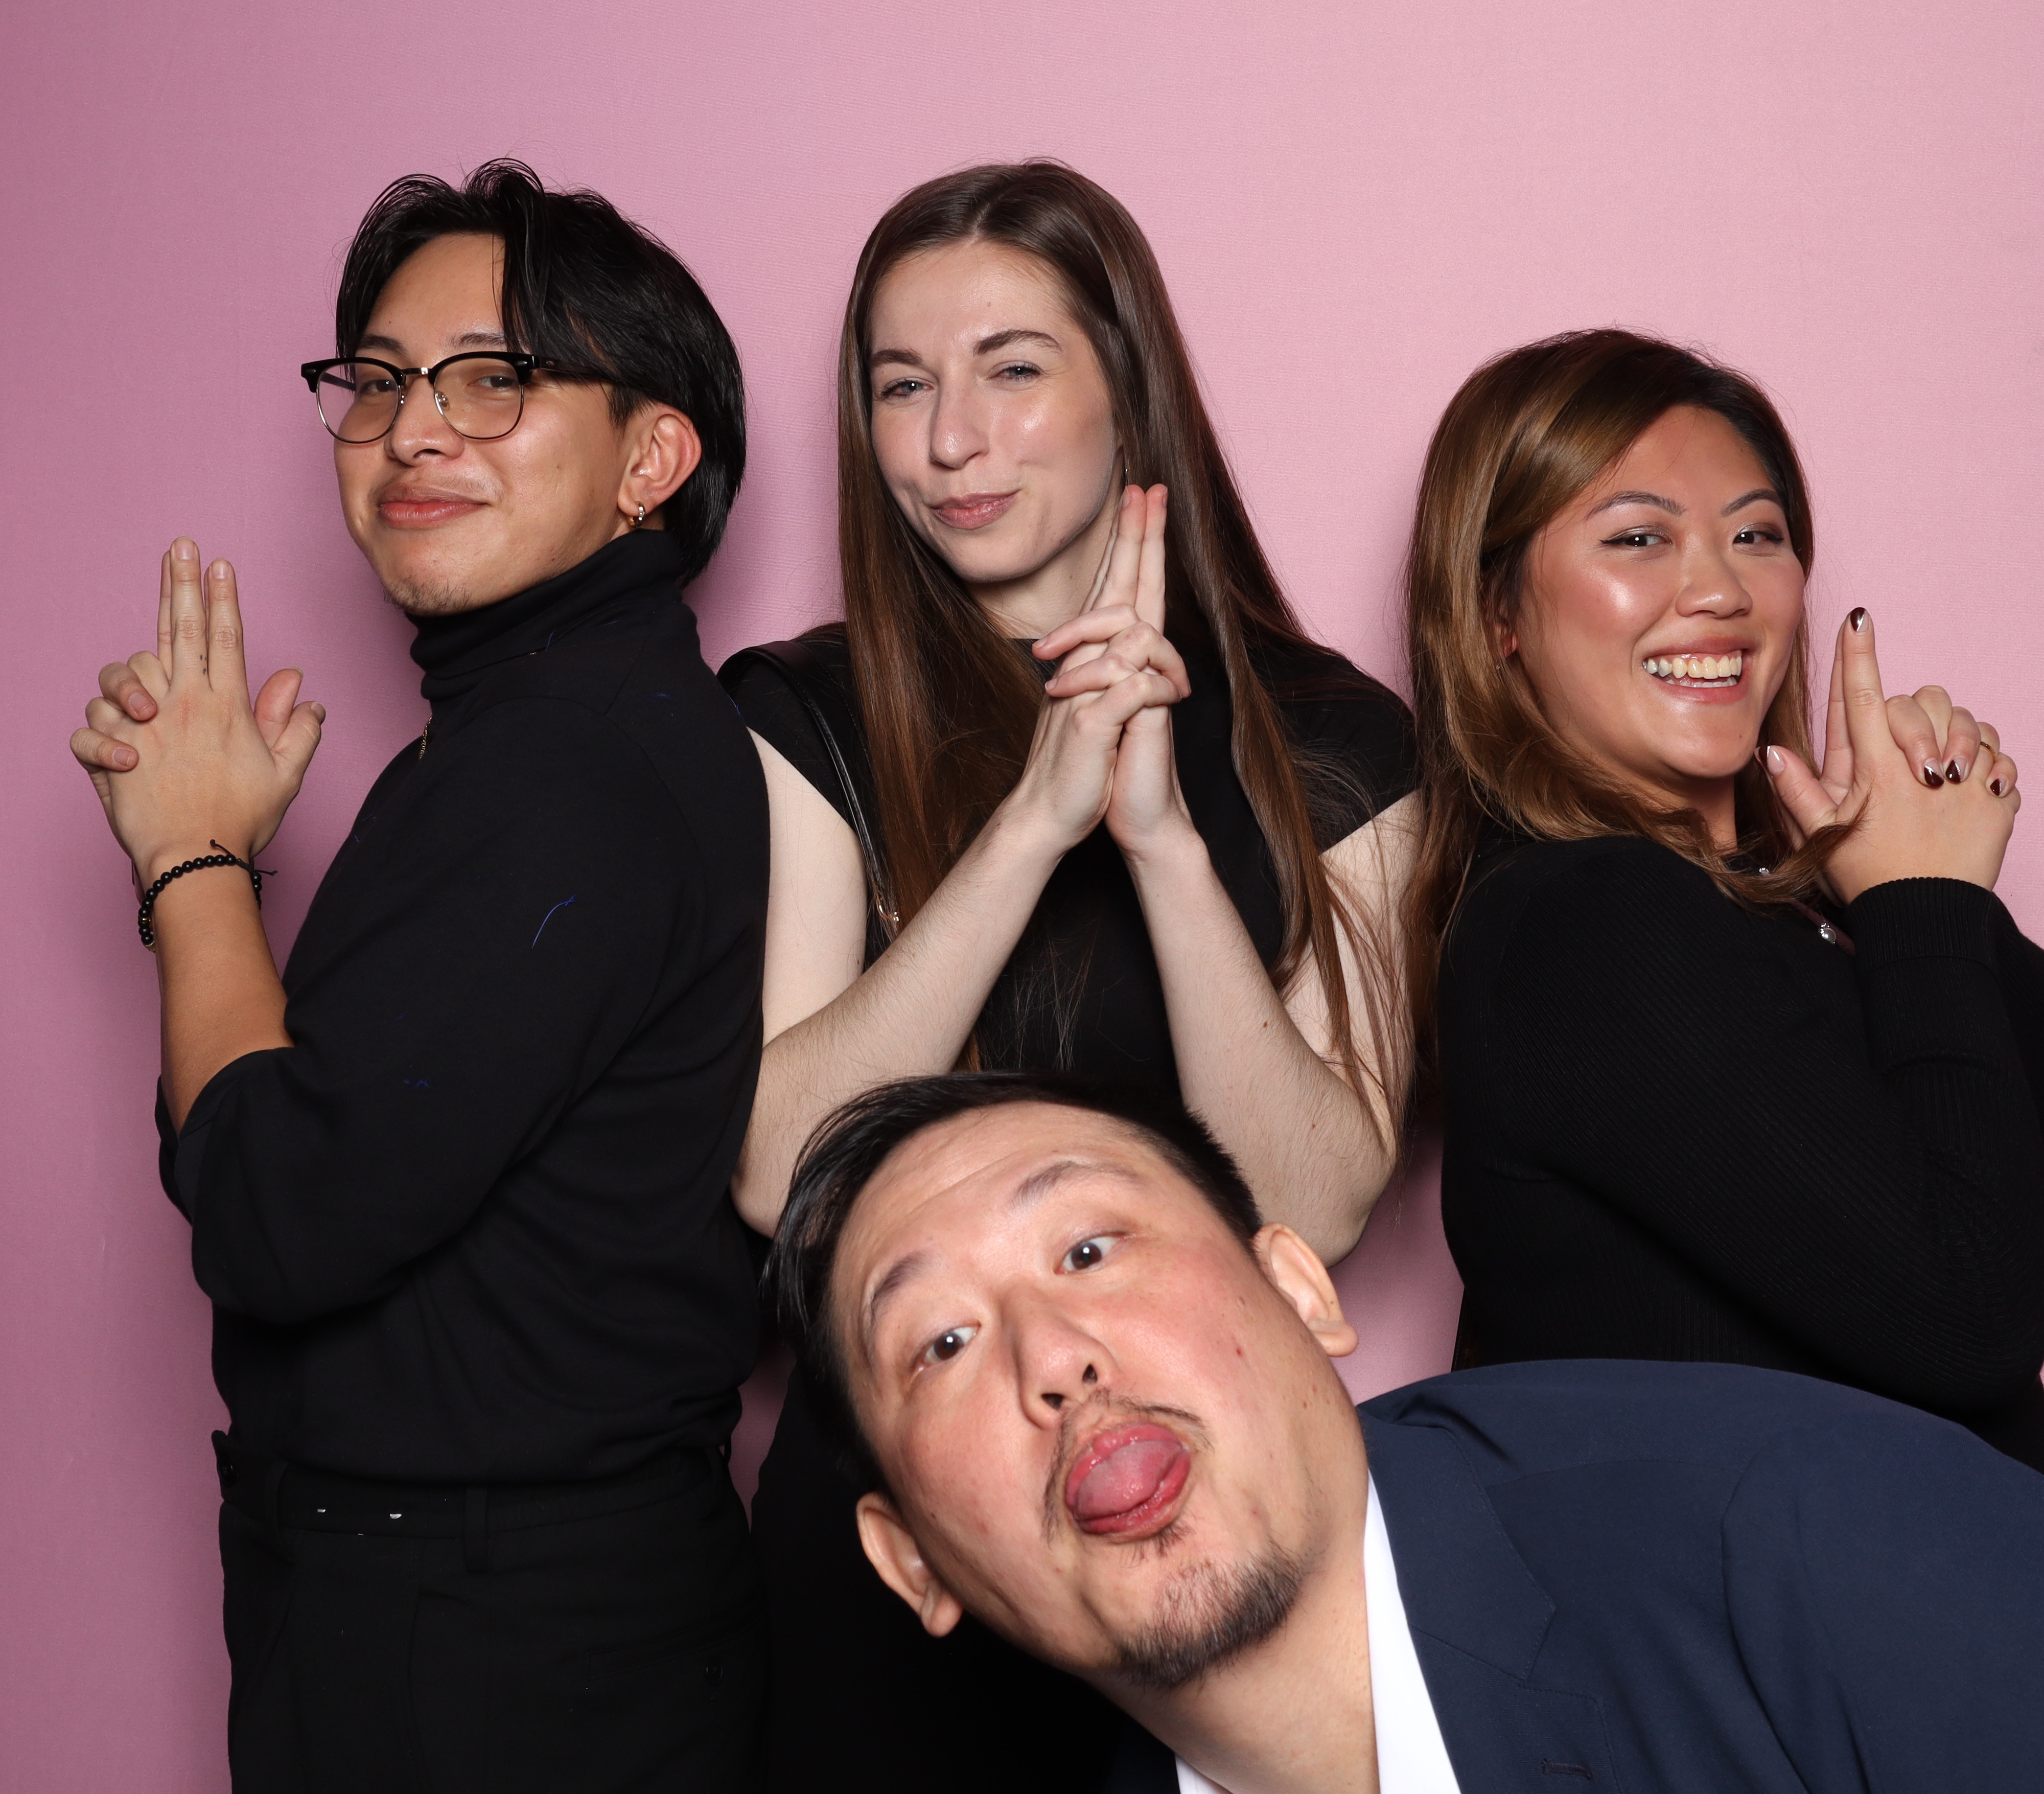 Four of OpenWeb's employees. Three of them are in a Charlie's Angels pose, holding finger guns; the fourth is in front, lower down in the frame, entering the picture from the side and sticking out his tongue.